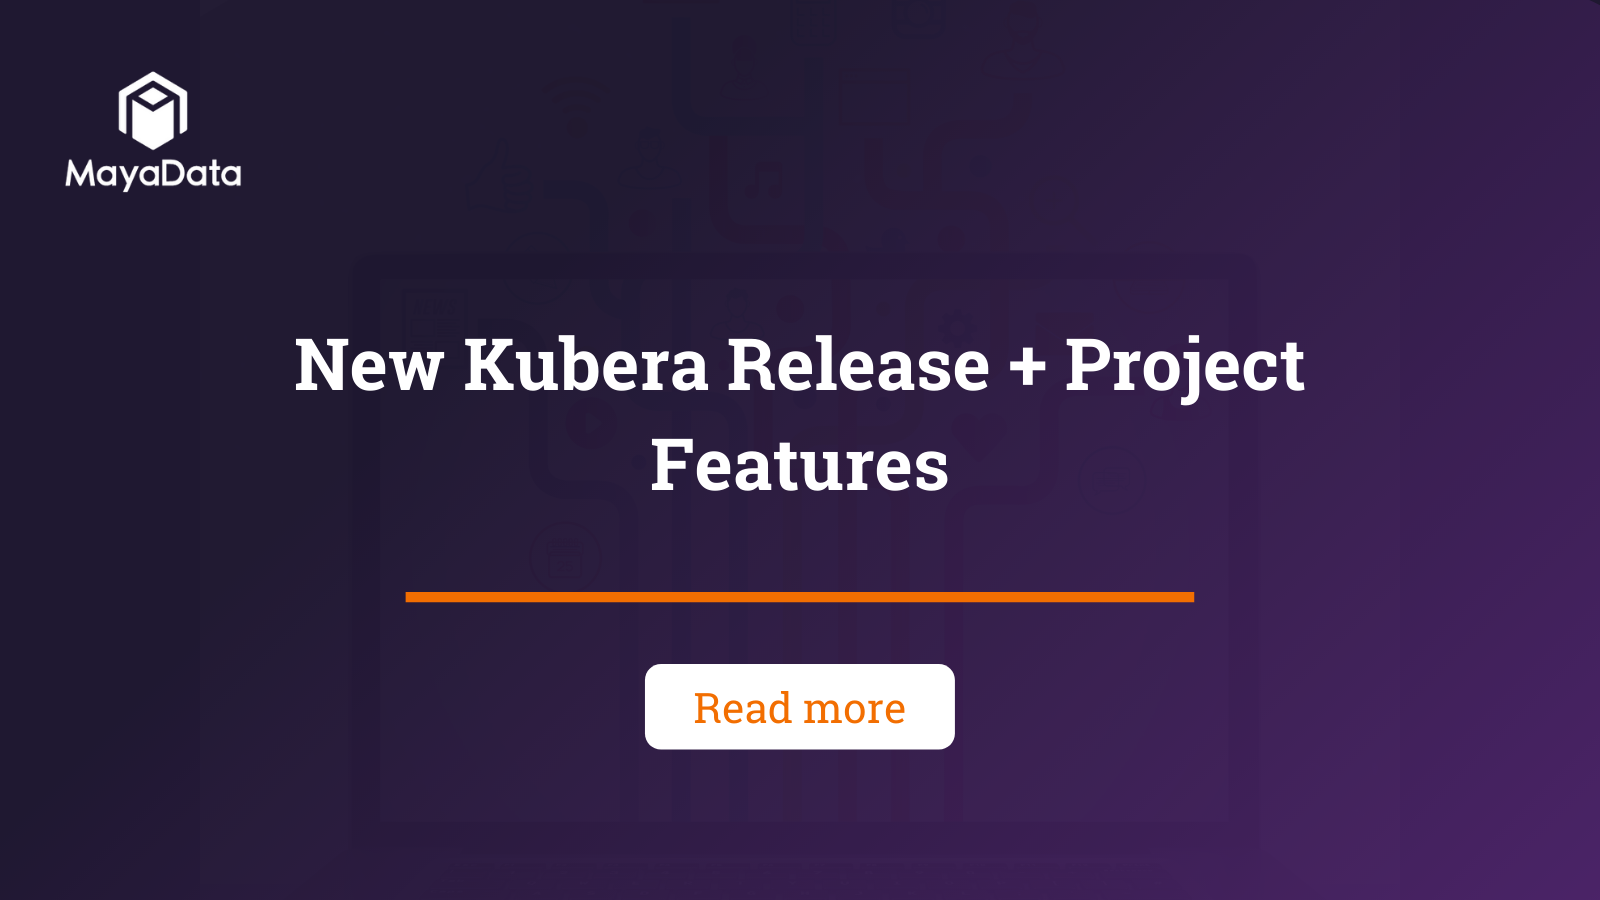 New Kubera Release + Project Features